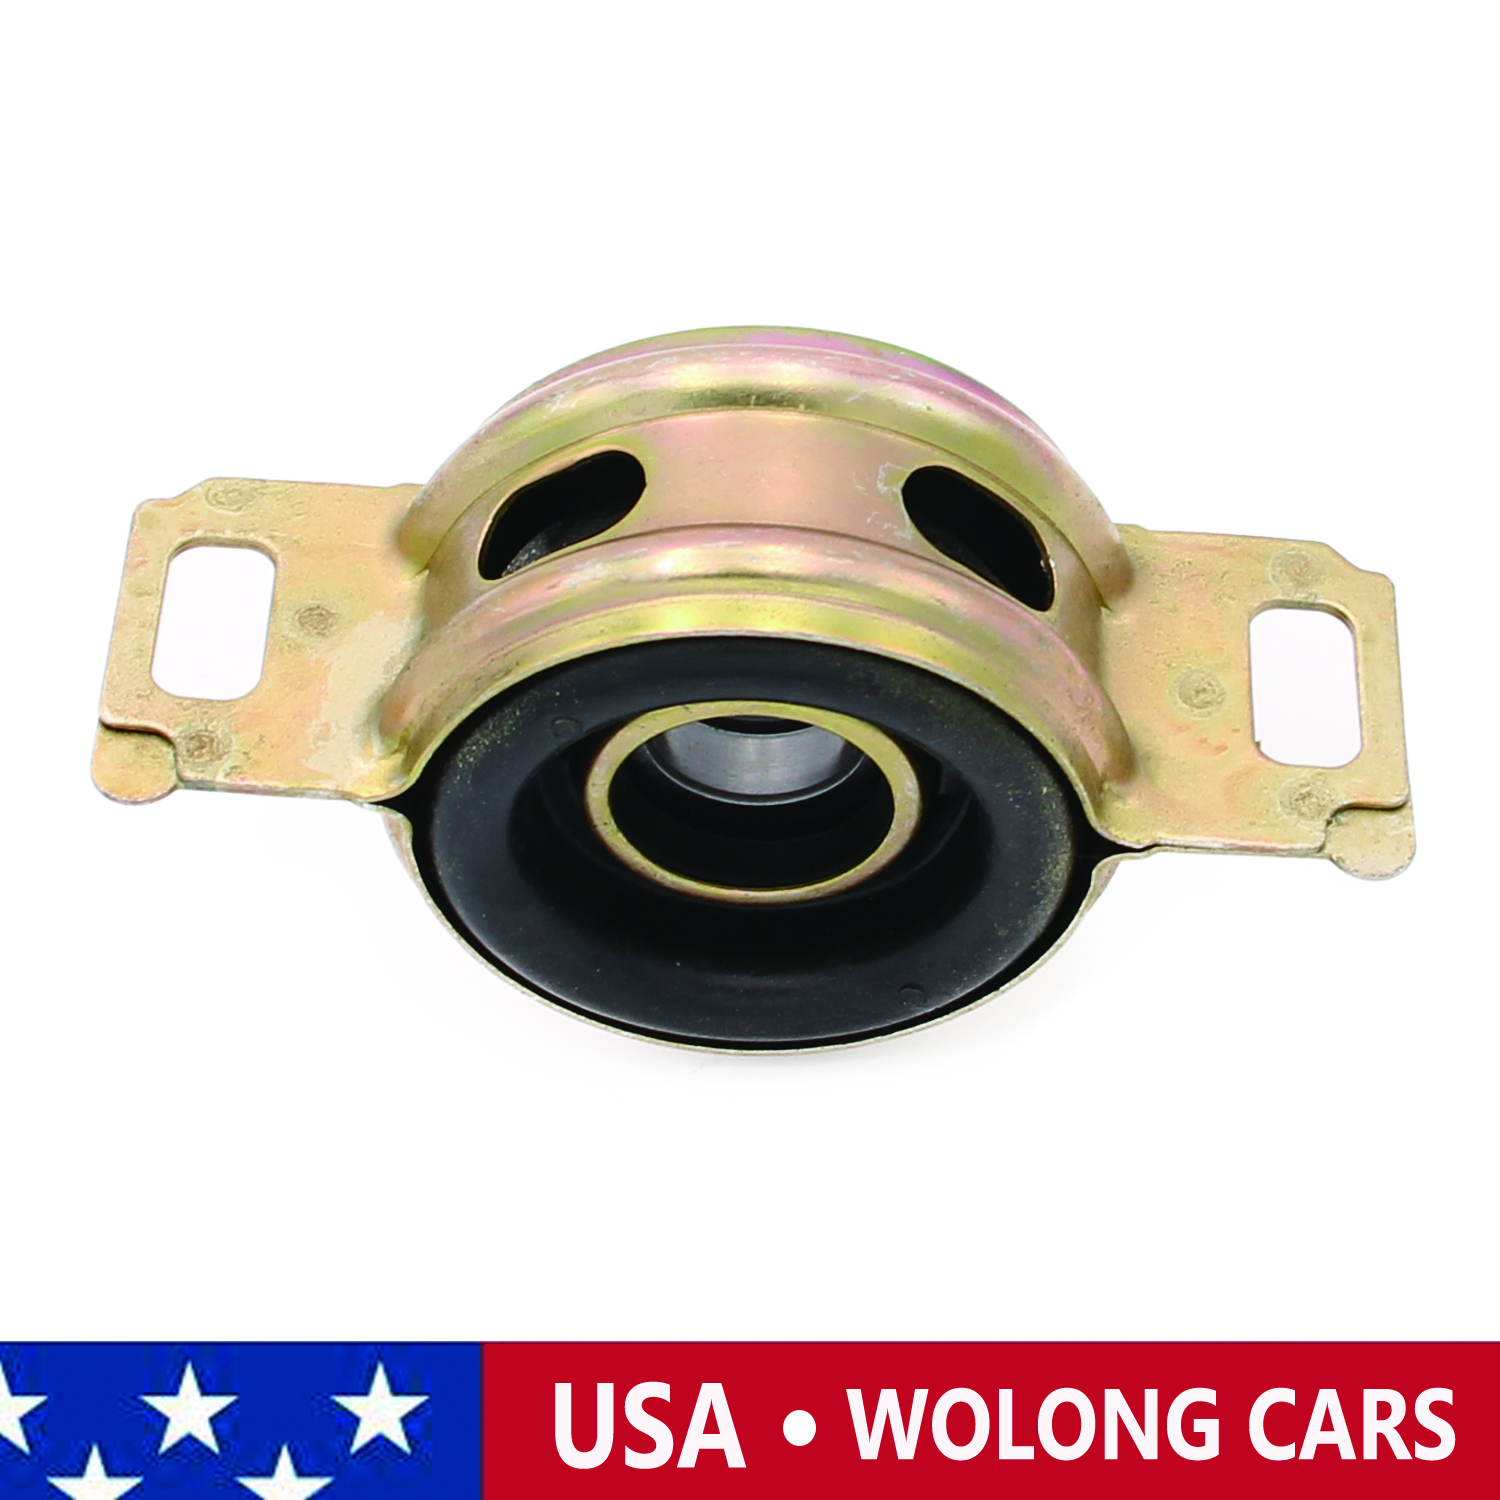 Drive Shaft Carrier Bearing Fits for Toyota Tacoma Tundra T100 4WD